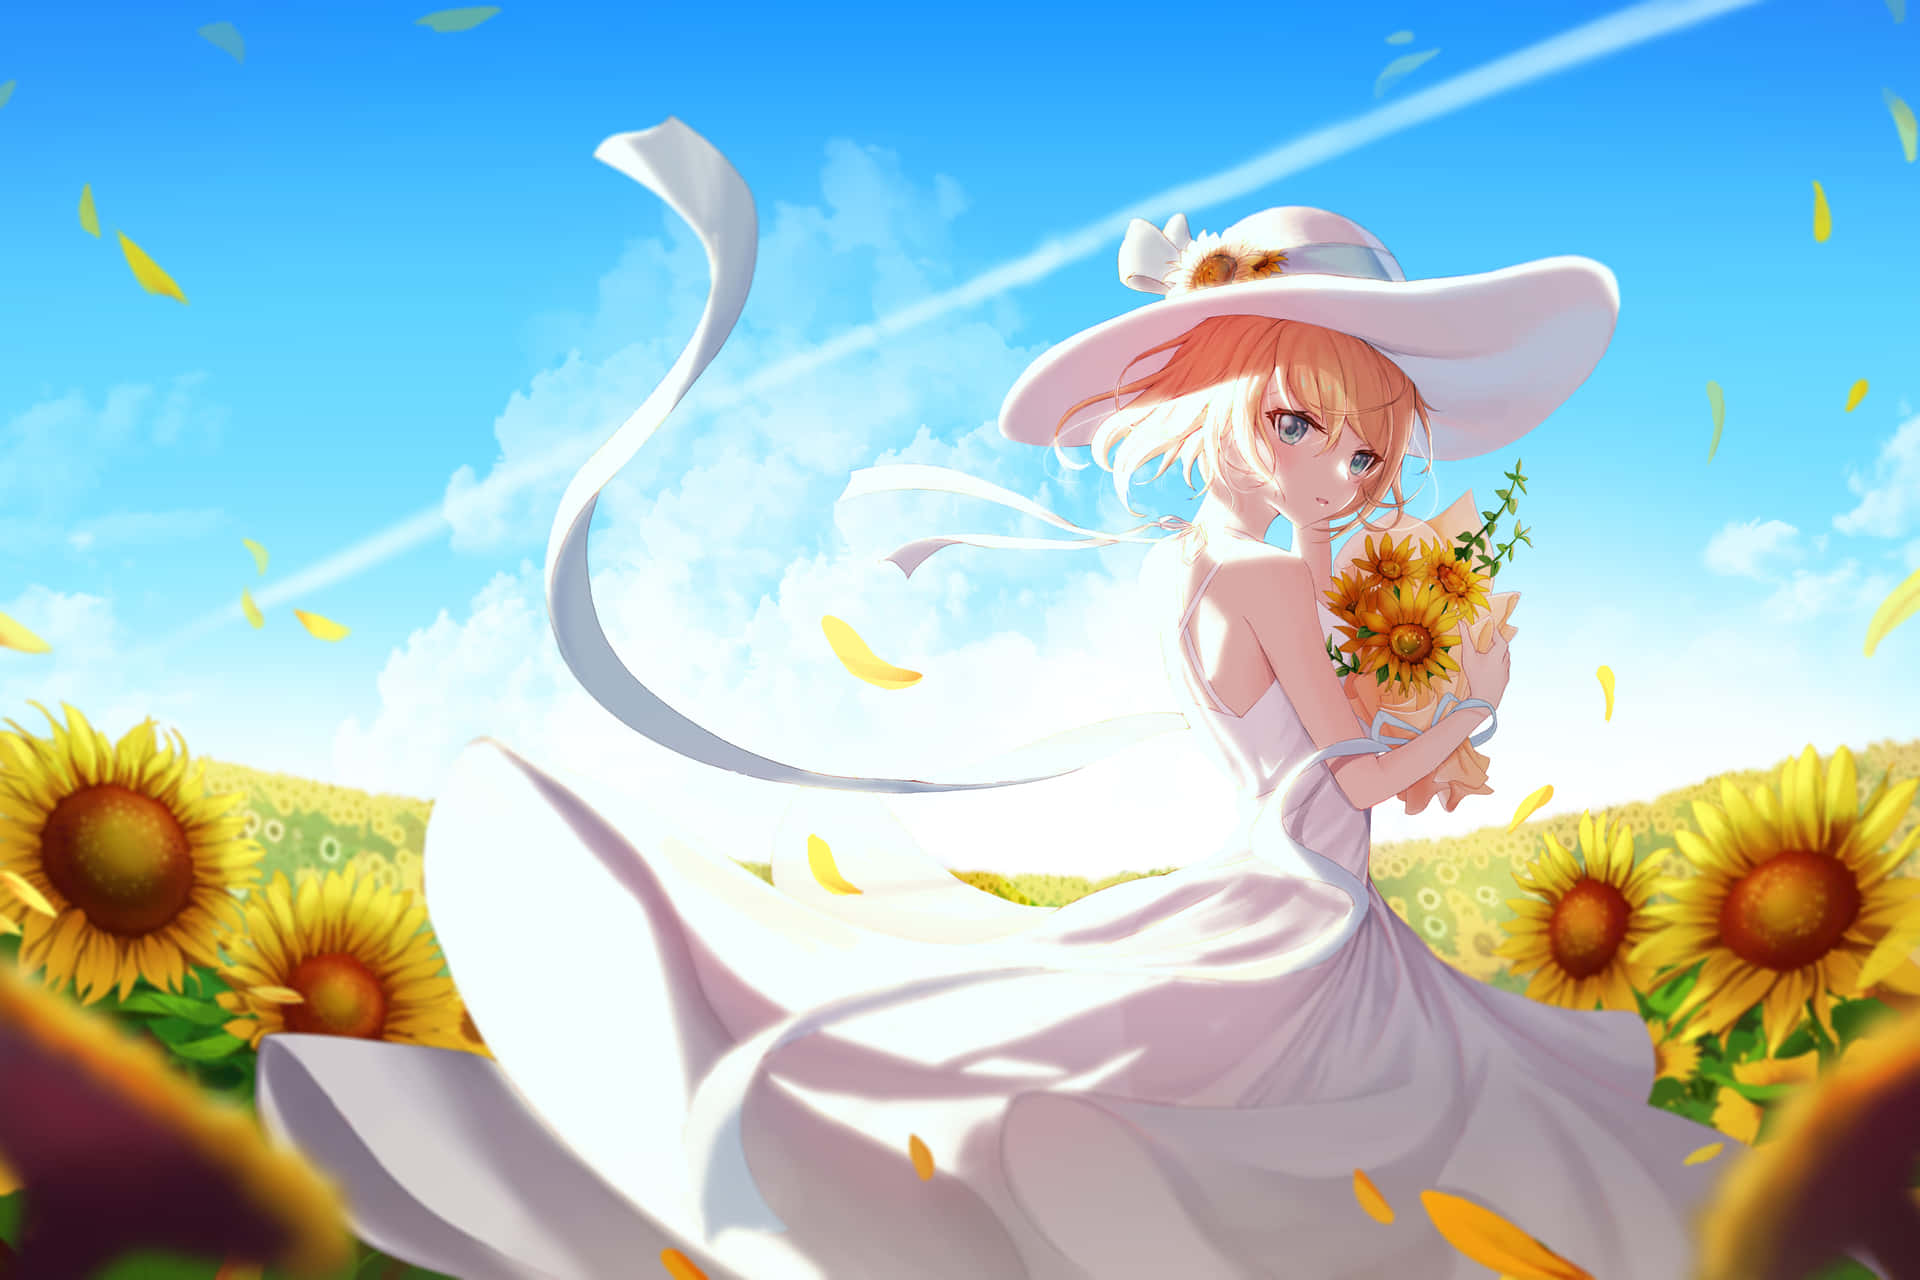 a girl in a white dress with sunflowers in her hair